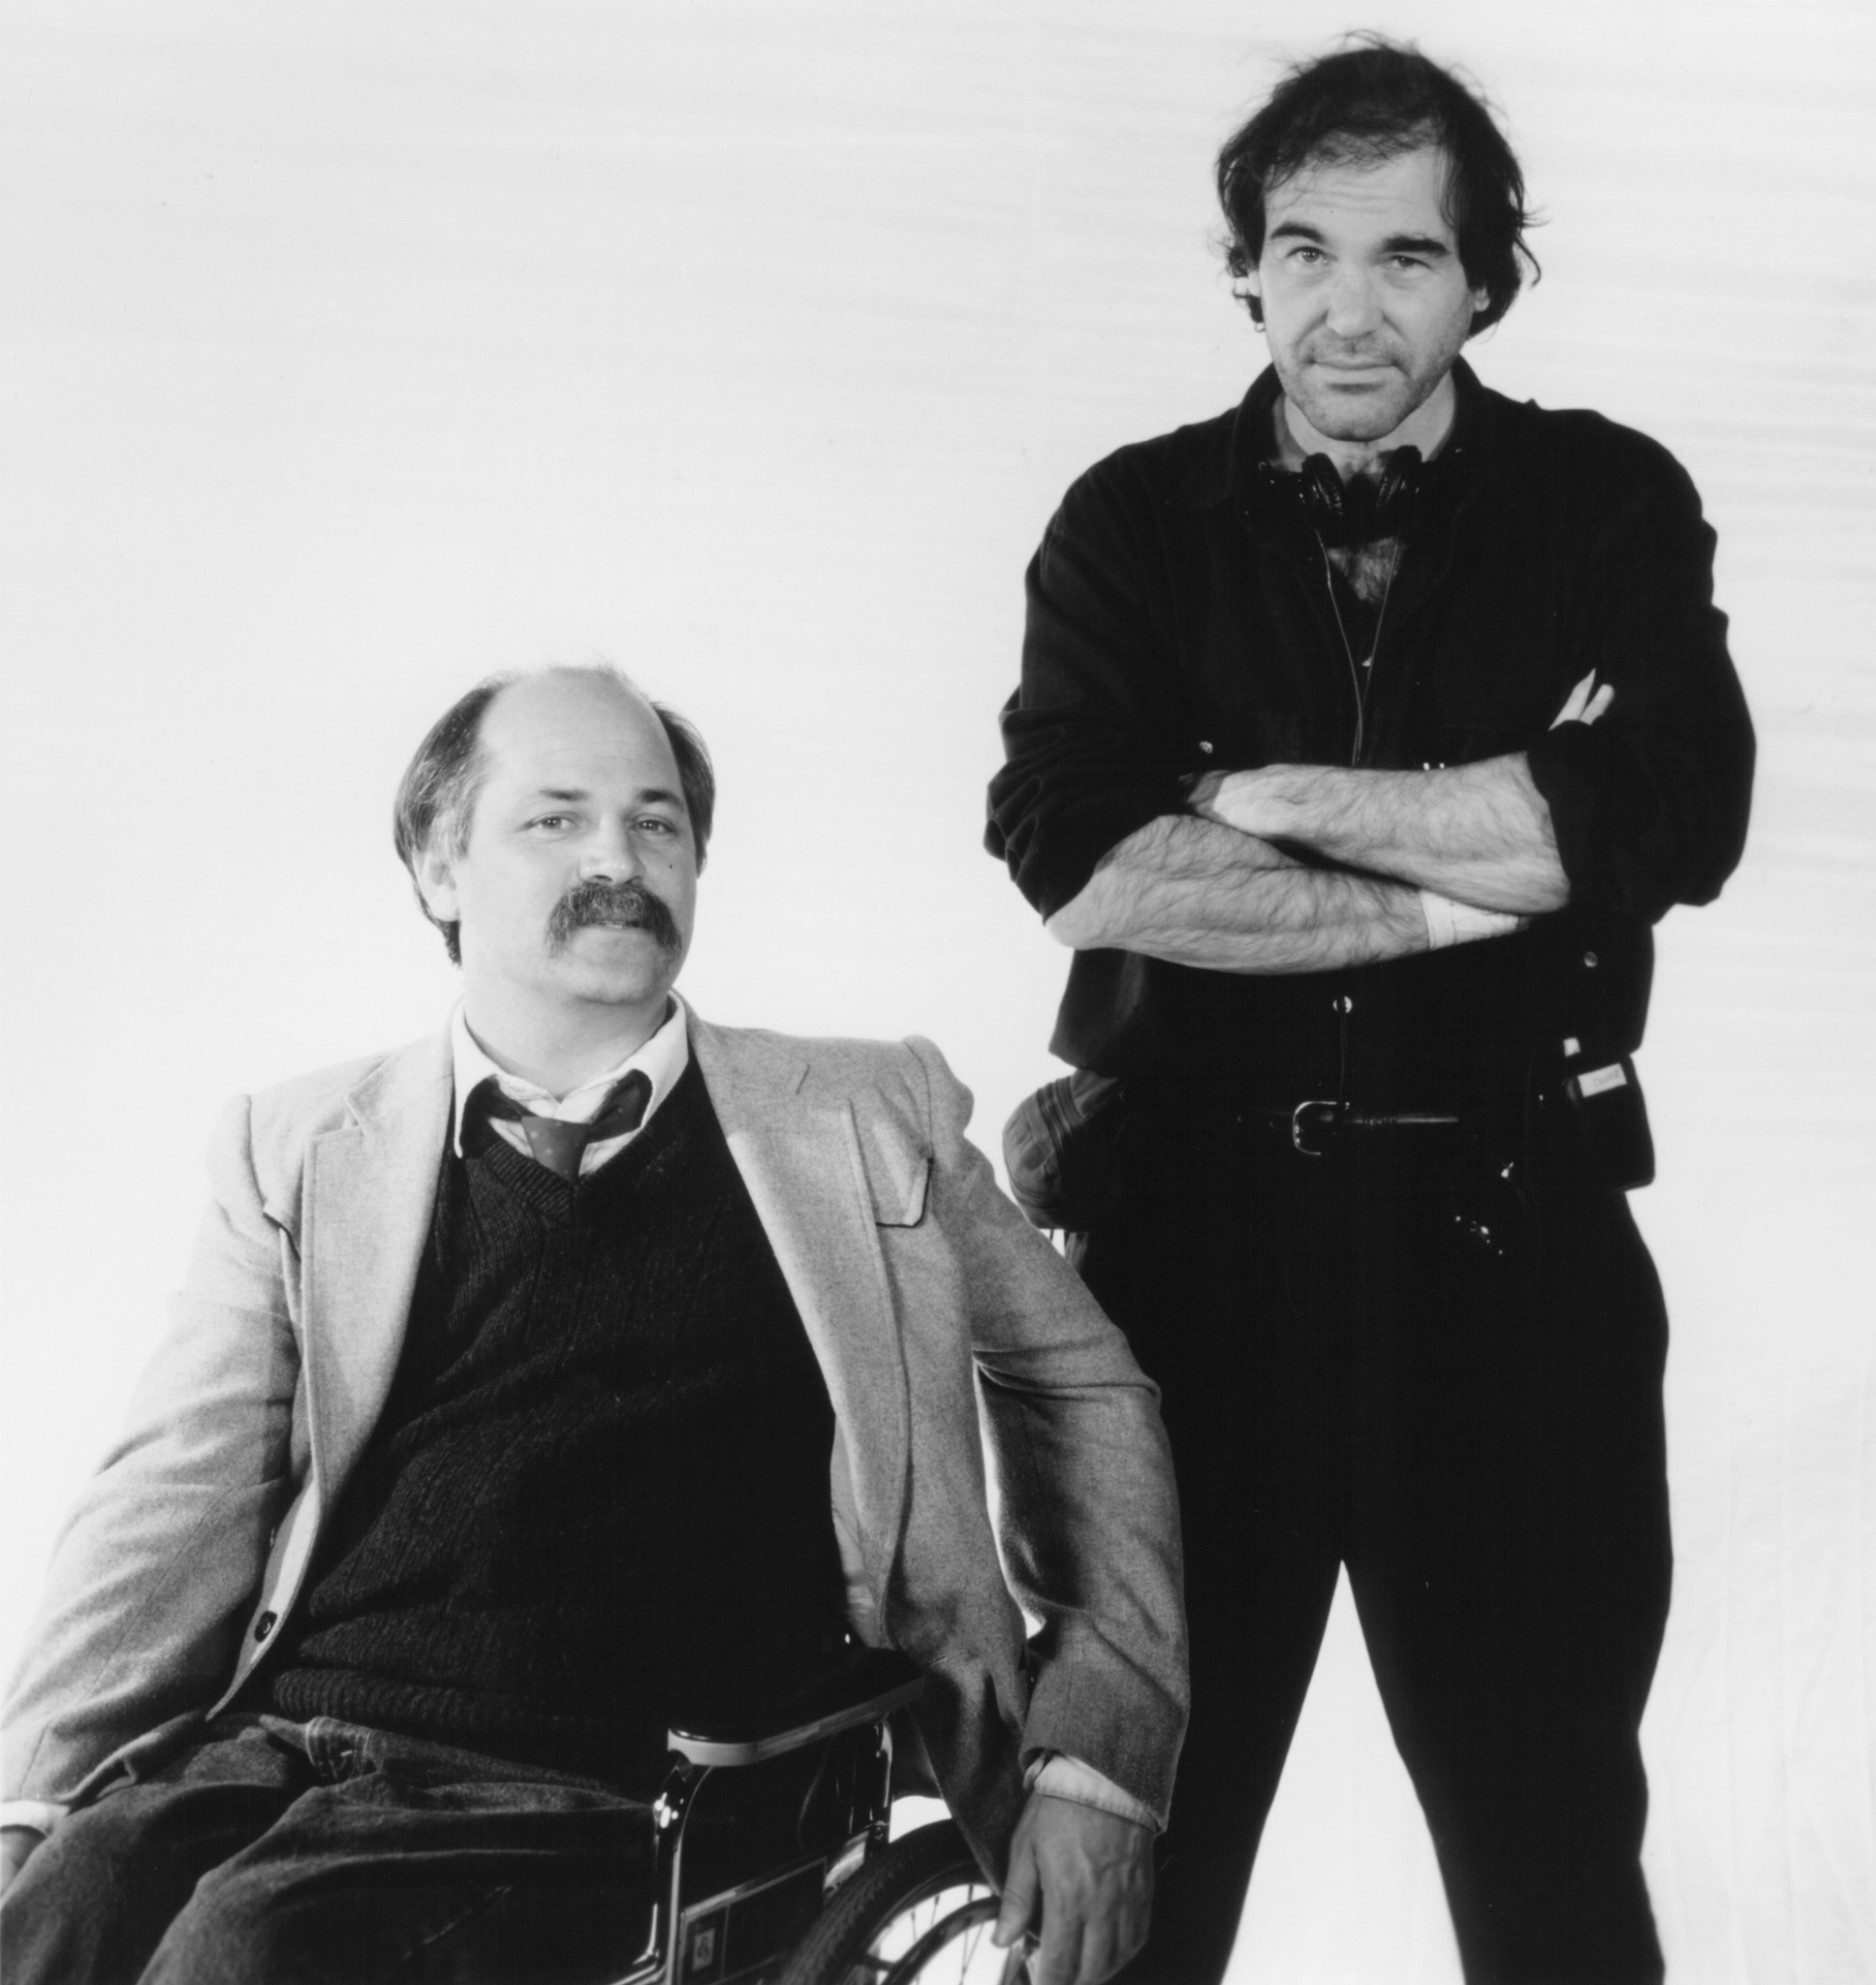 Still of Oliver Stone and Ron Kovic in Gimes liepos 4-aja (1989)